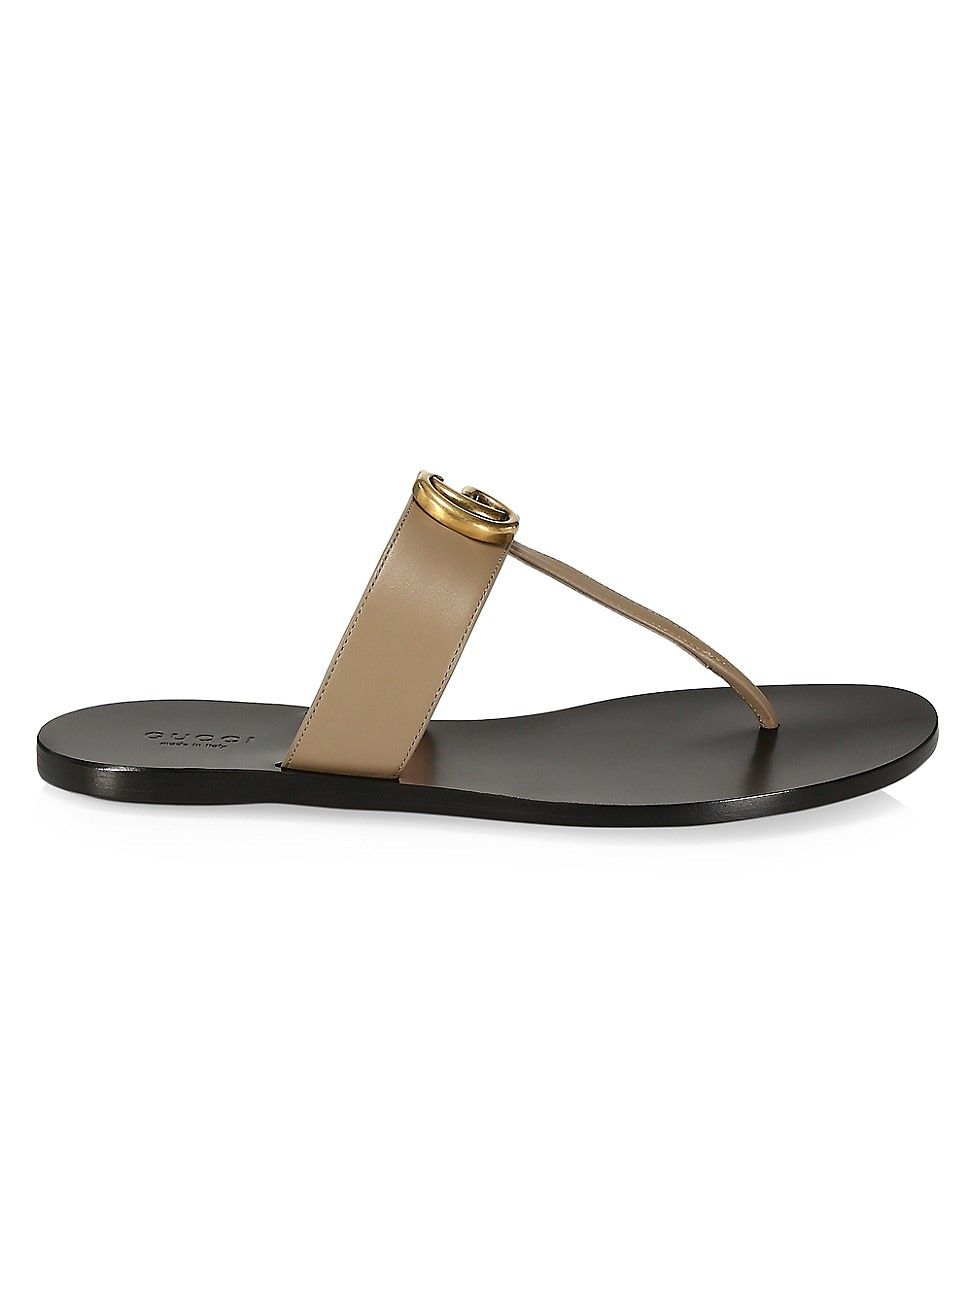 Gucci Women's Marmont Leather Thong Sandals With Double G - Mud - Size 7 | Saks Fifth Avenue